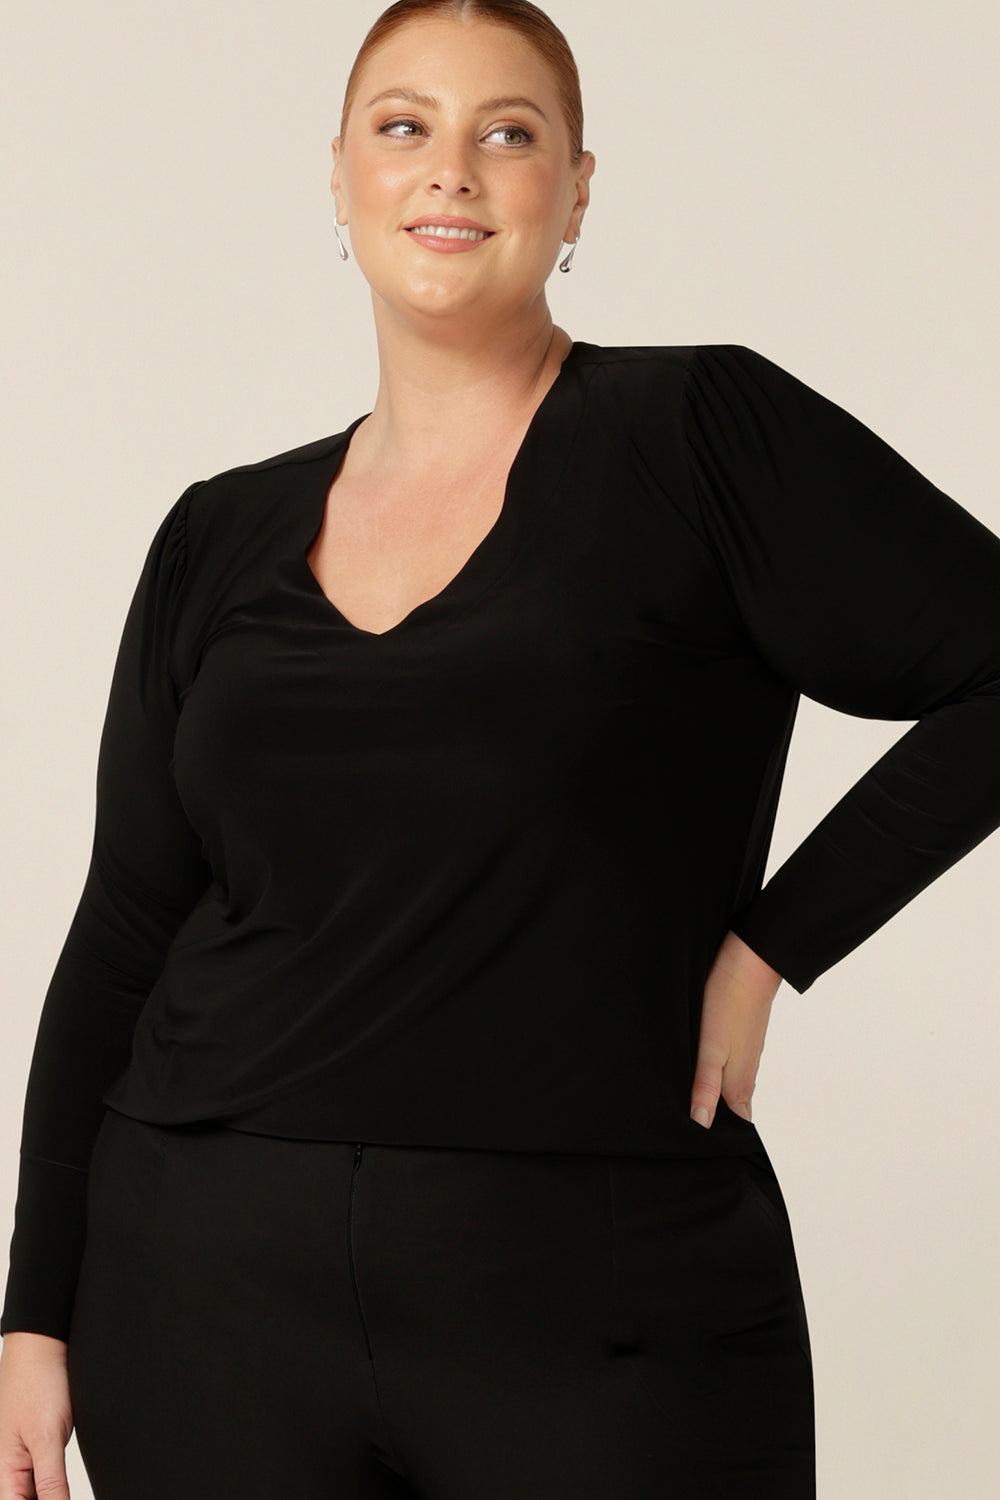 A size 18, fuller figure woman wears a long sleeve, V neck top in black jersey. A comfortable top for work or casual wear, this classic women's top is made in Australia by Australia and New Zealand women's clothing label, L&F..